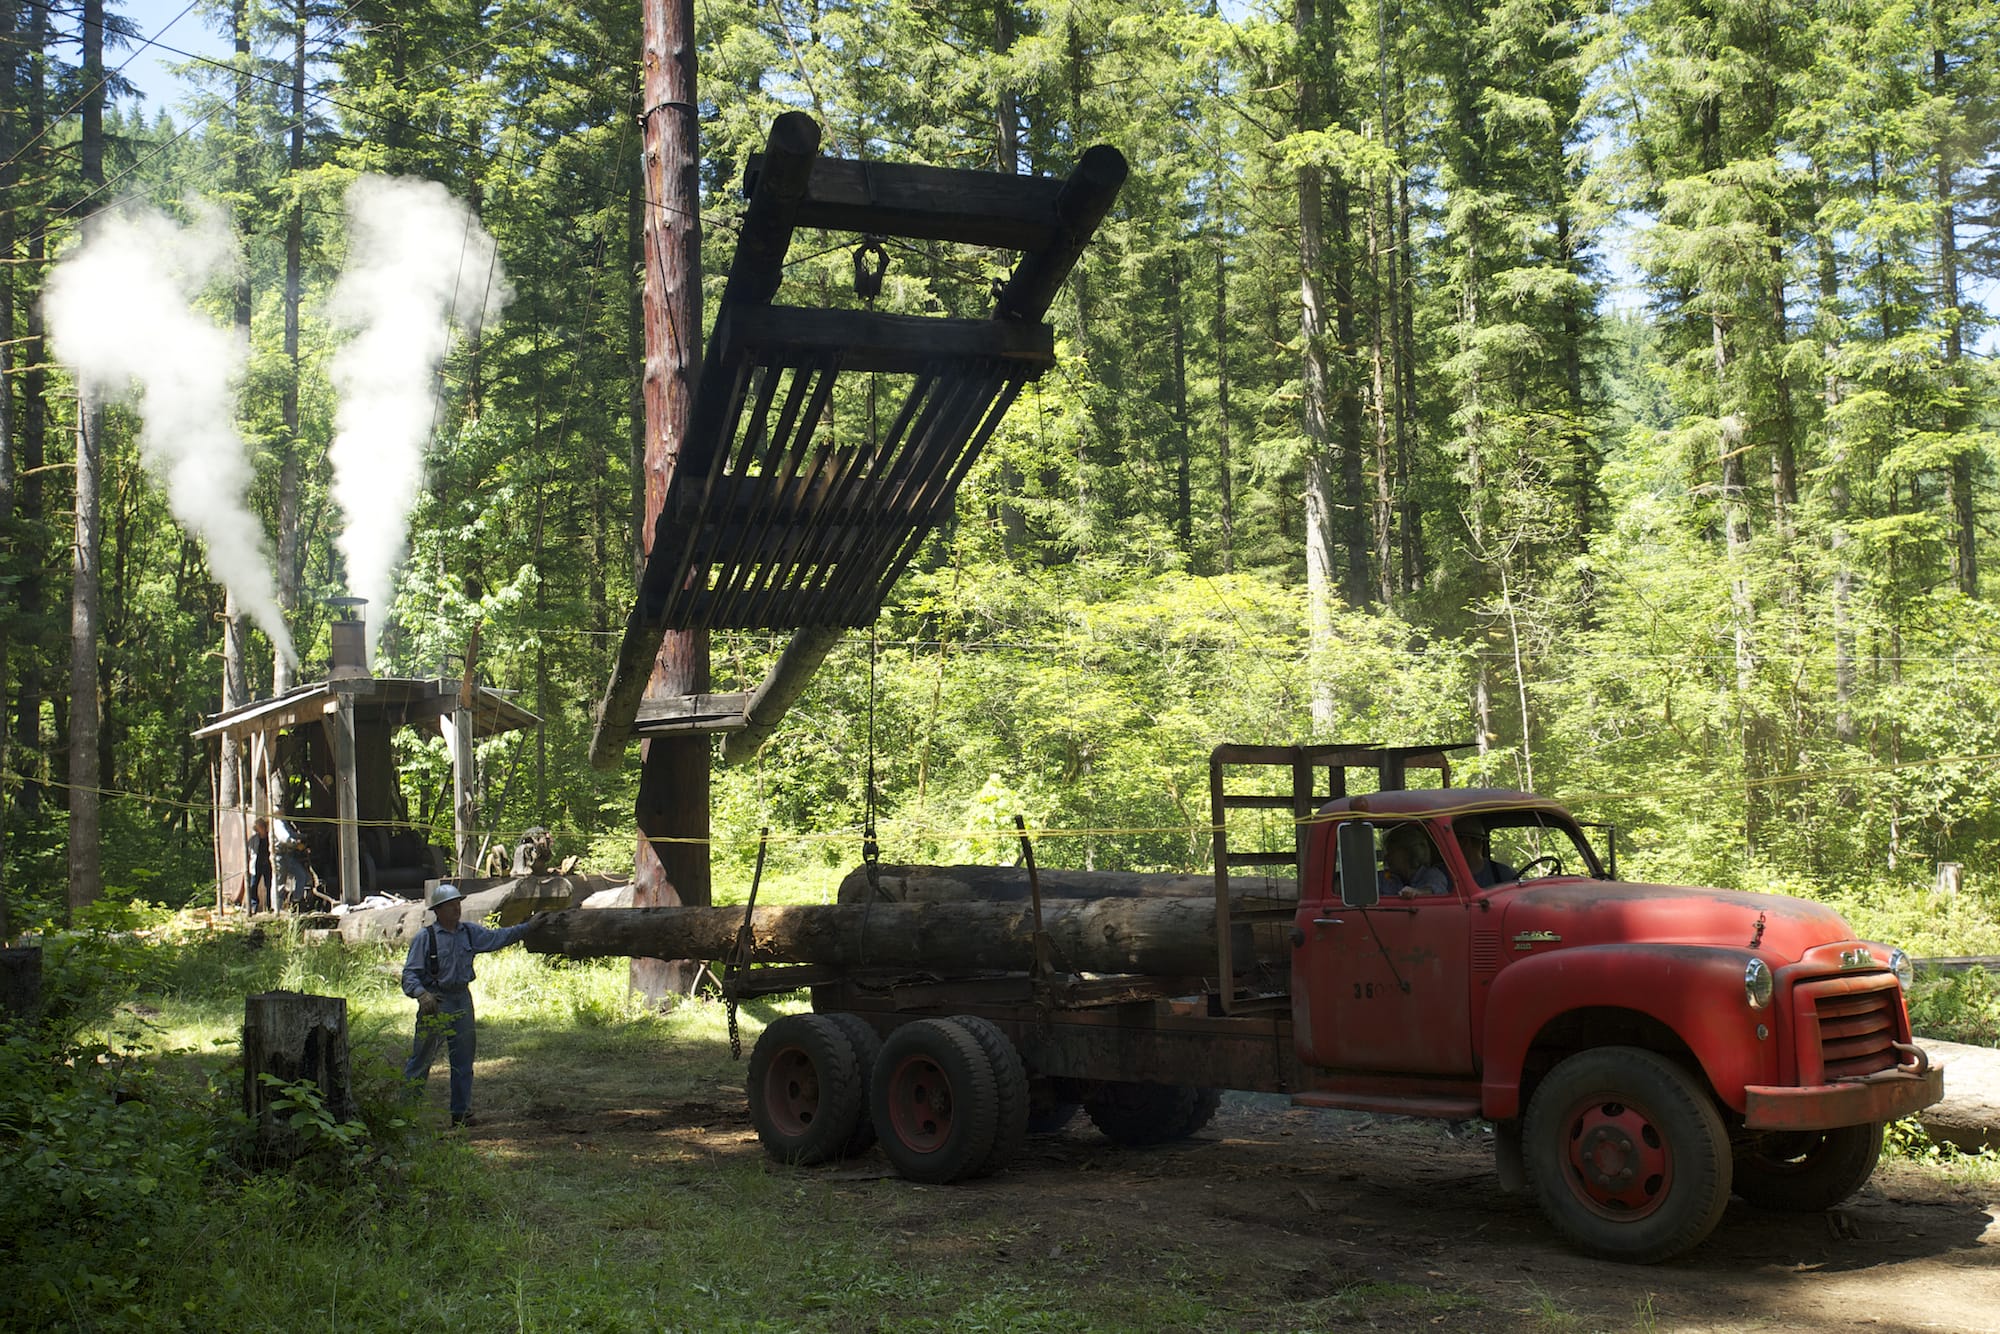 A yarder donkey moves logs into position as the heel boom loader places the trees onto a waiting truck during the Pomeroy Living History Farm's steam logging demonstration on Sunday.